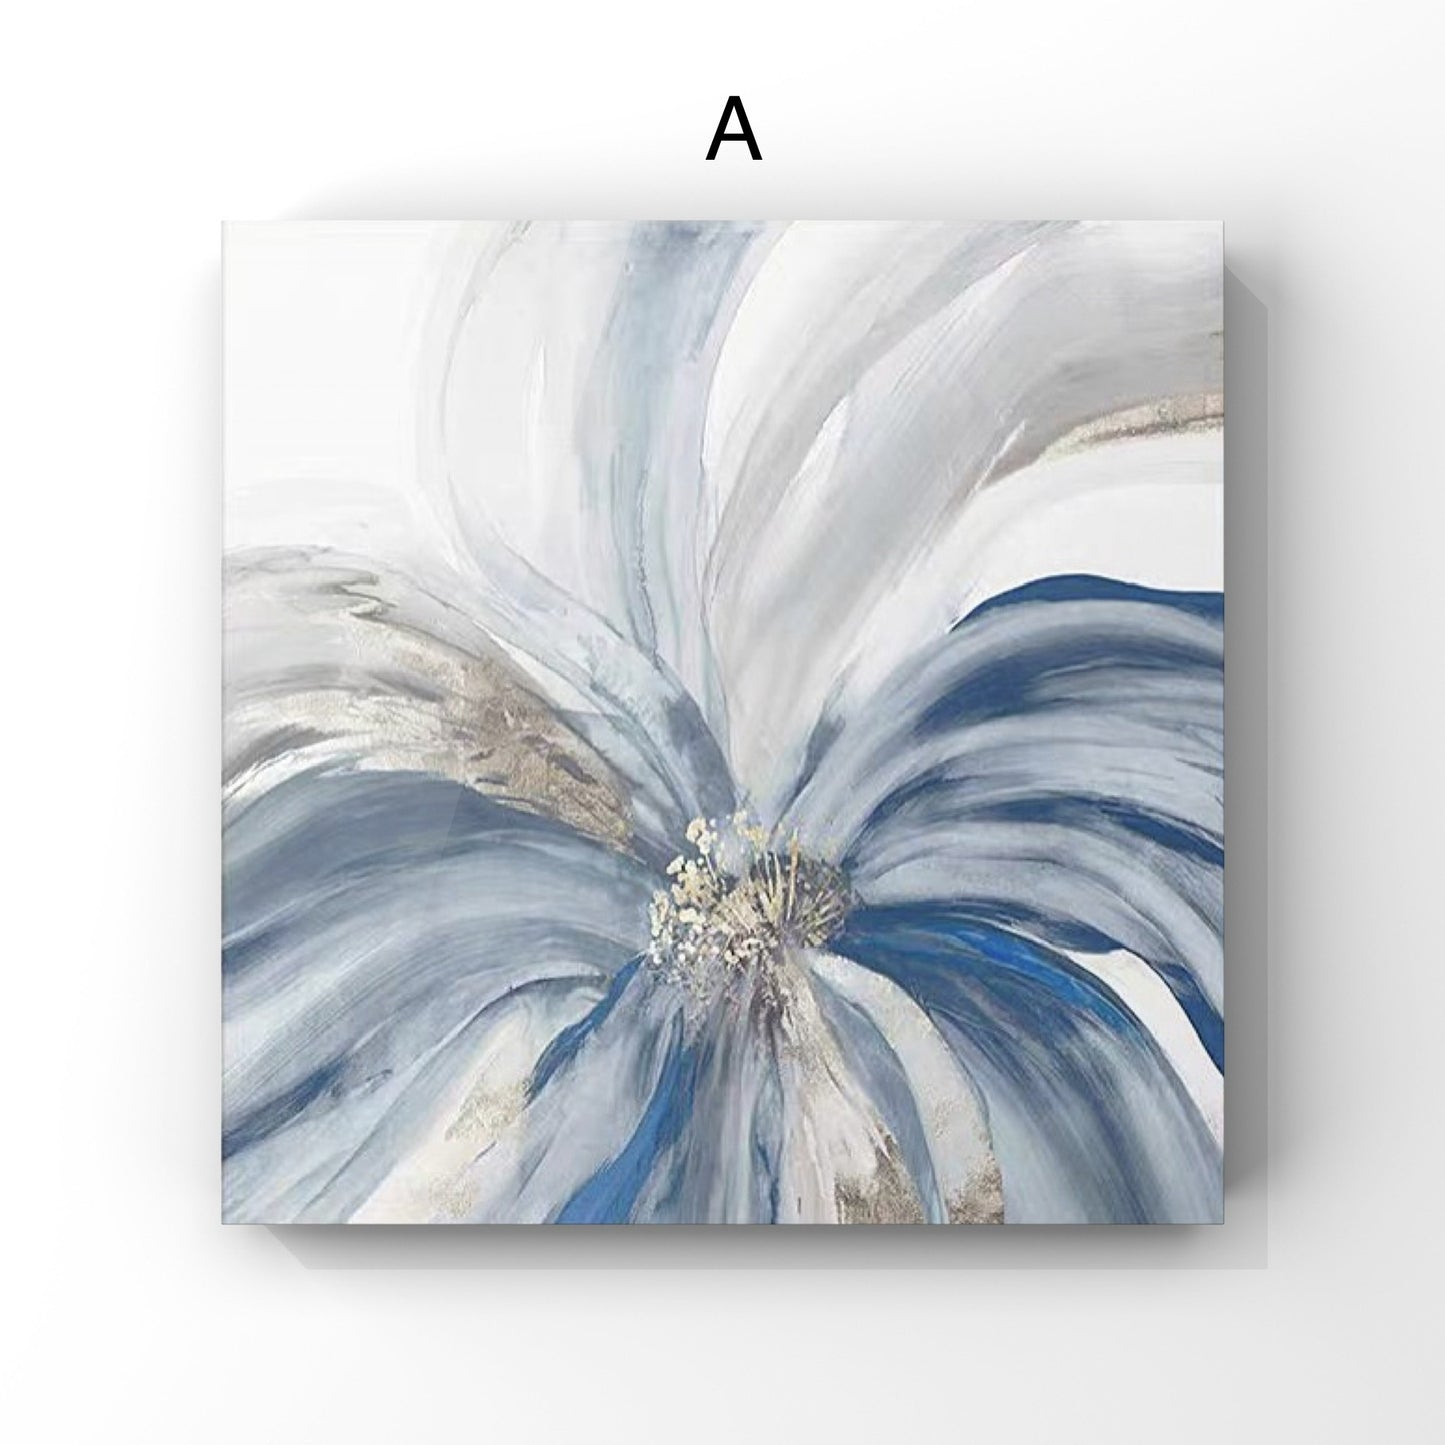 SET OF 2 BLUE FLOWER, HAND-PAINTED CANVAS, FLOWER PAINTING